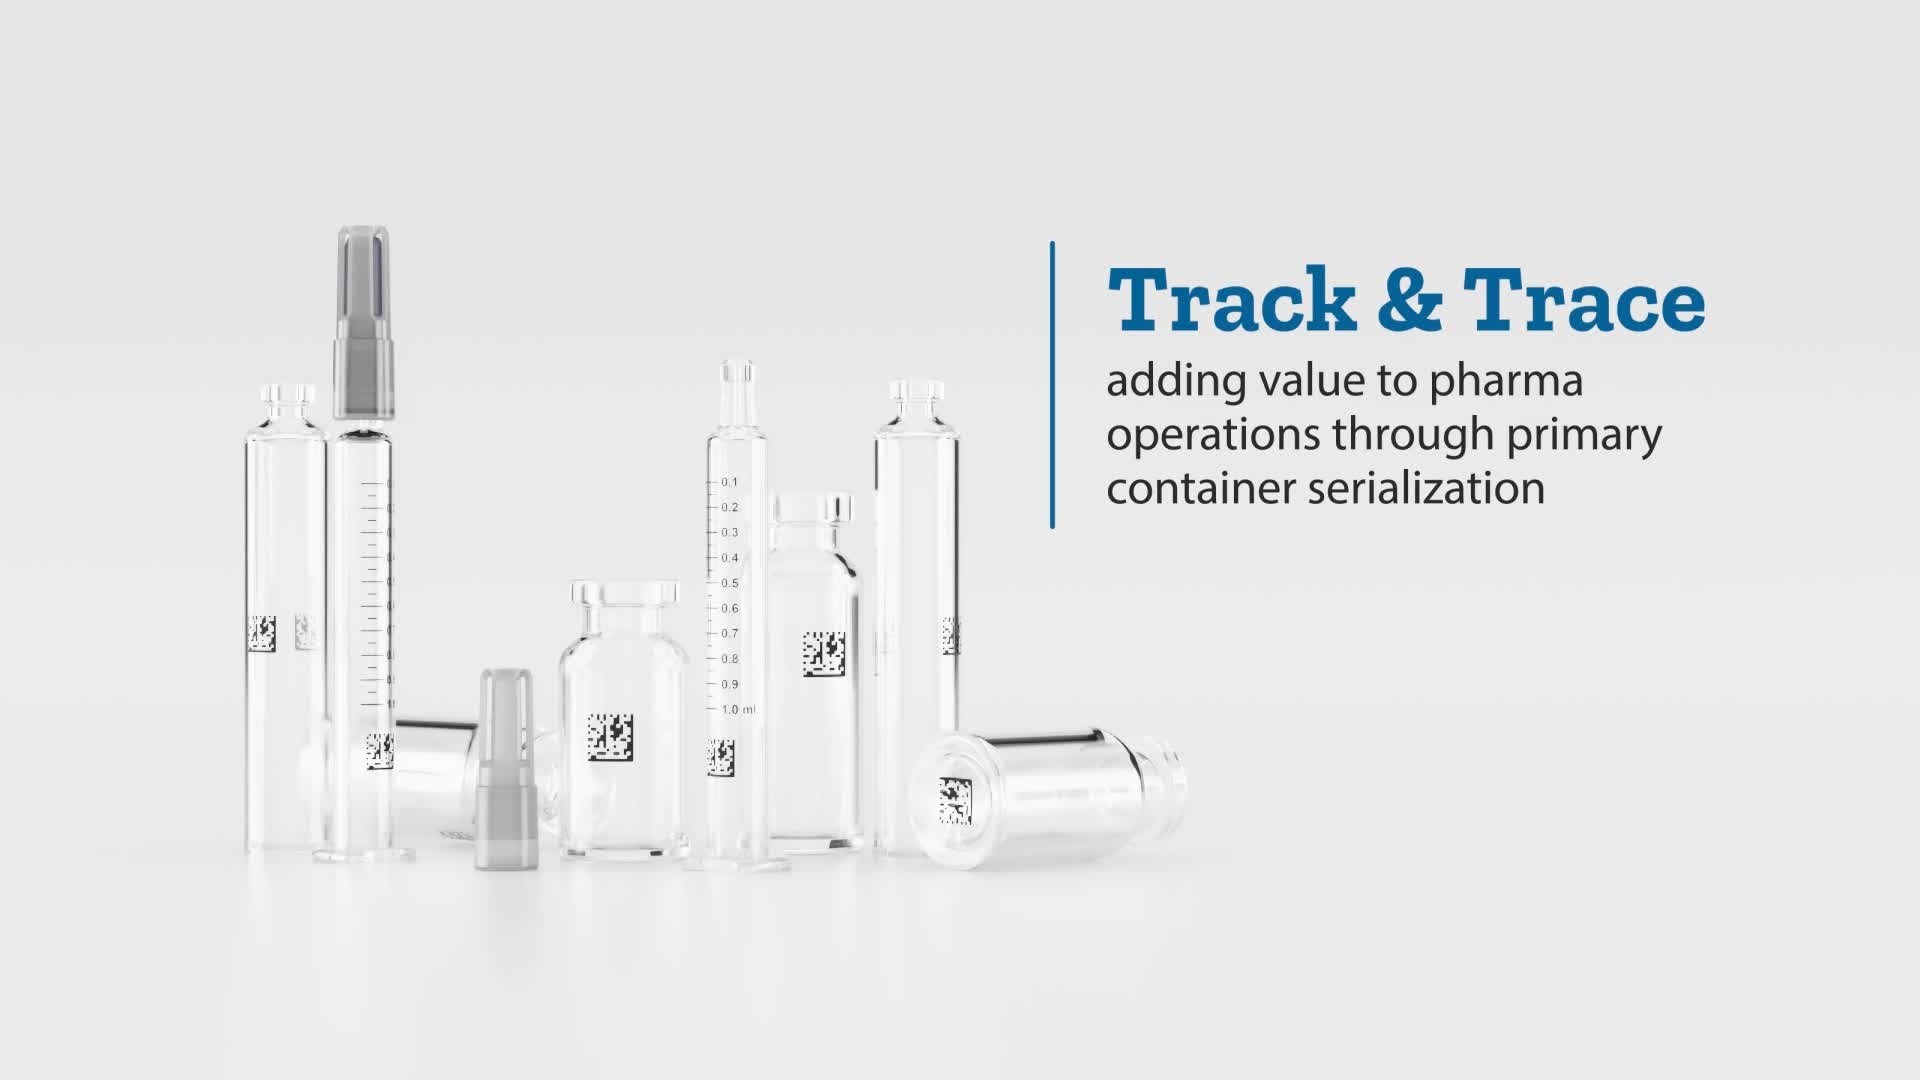 Primary Container traceability